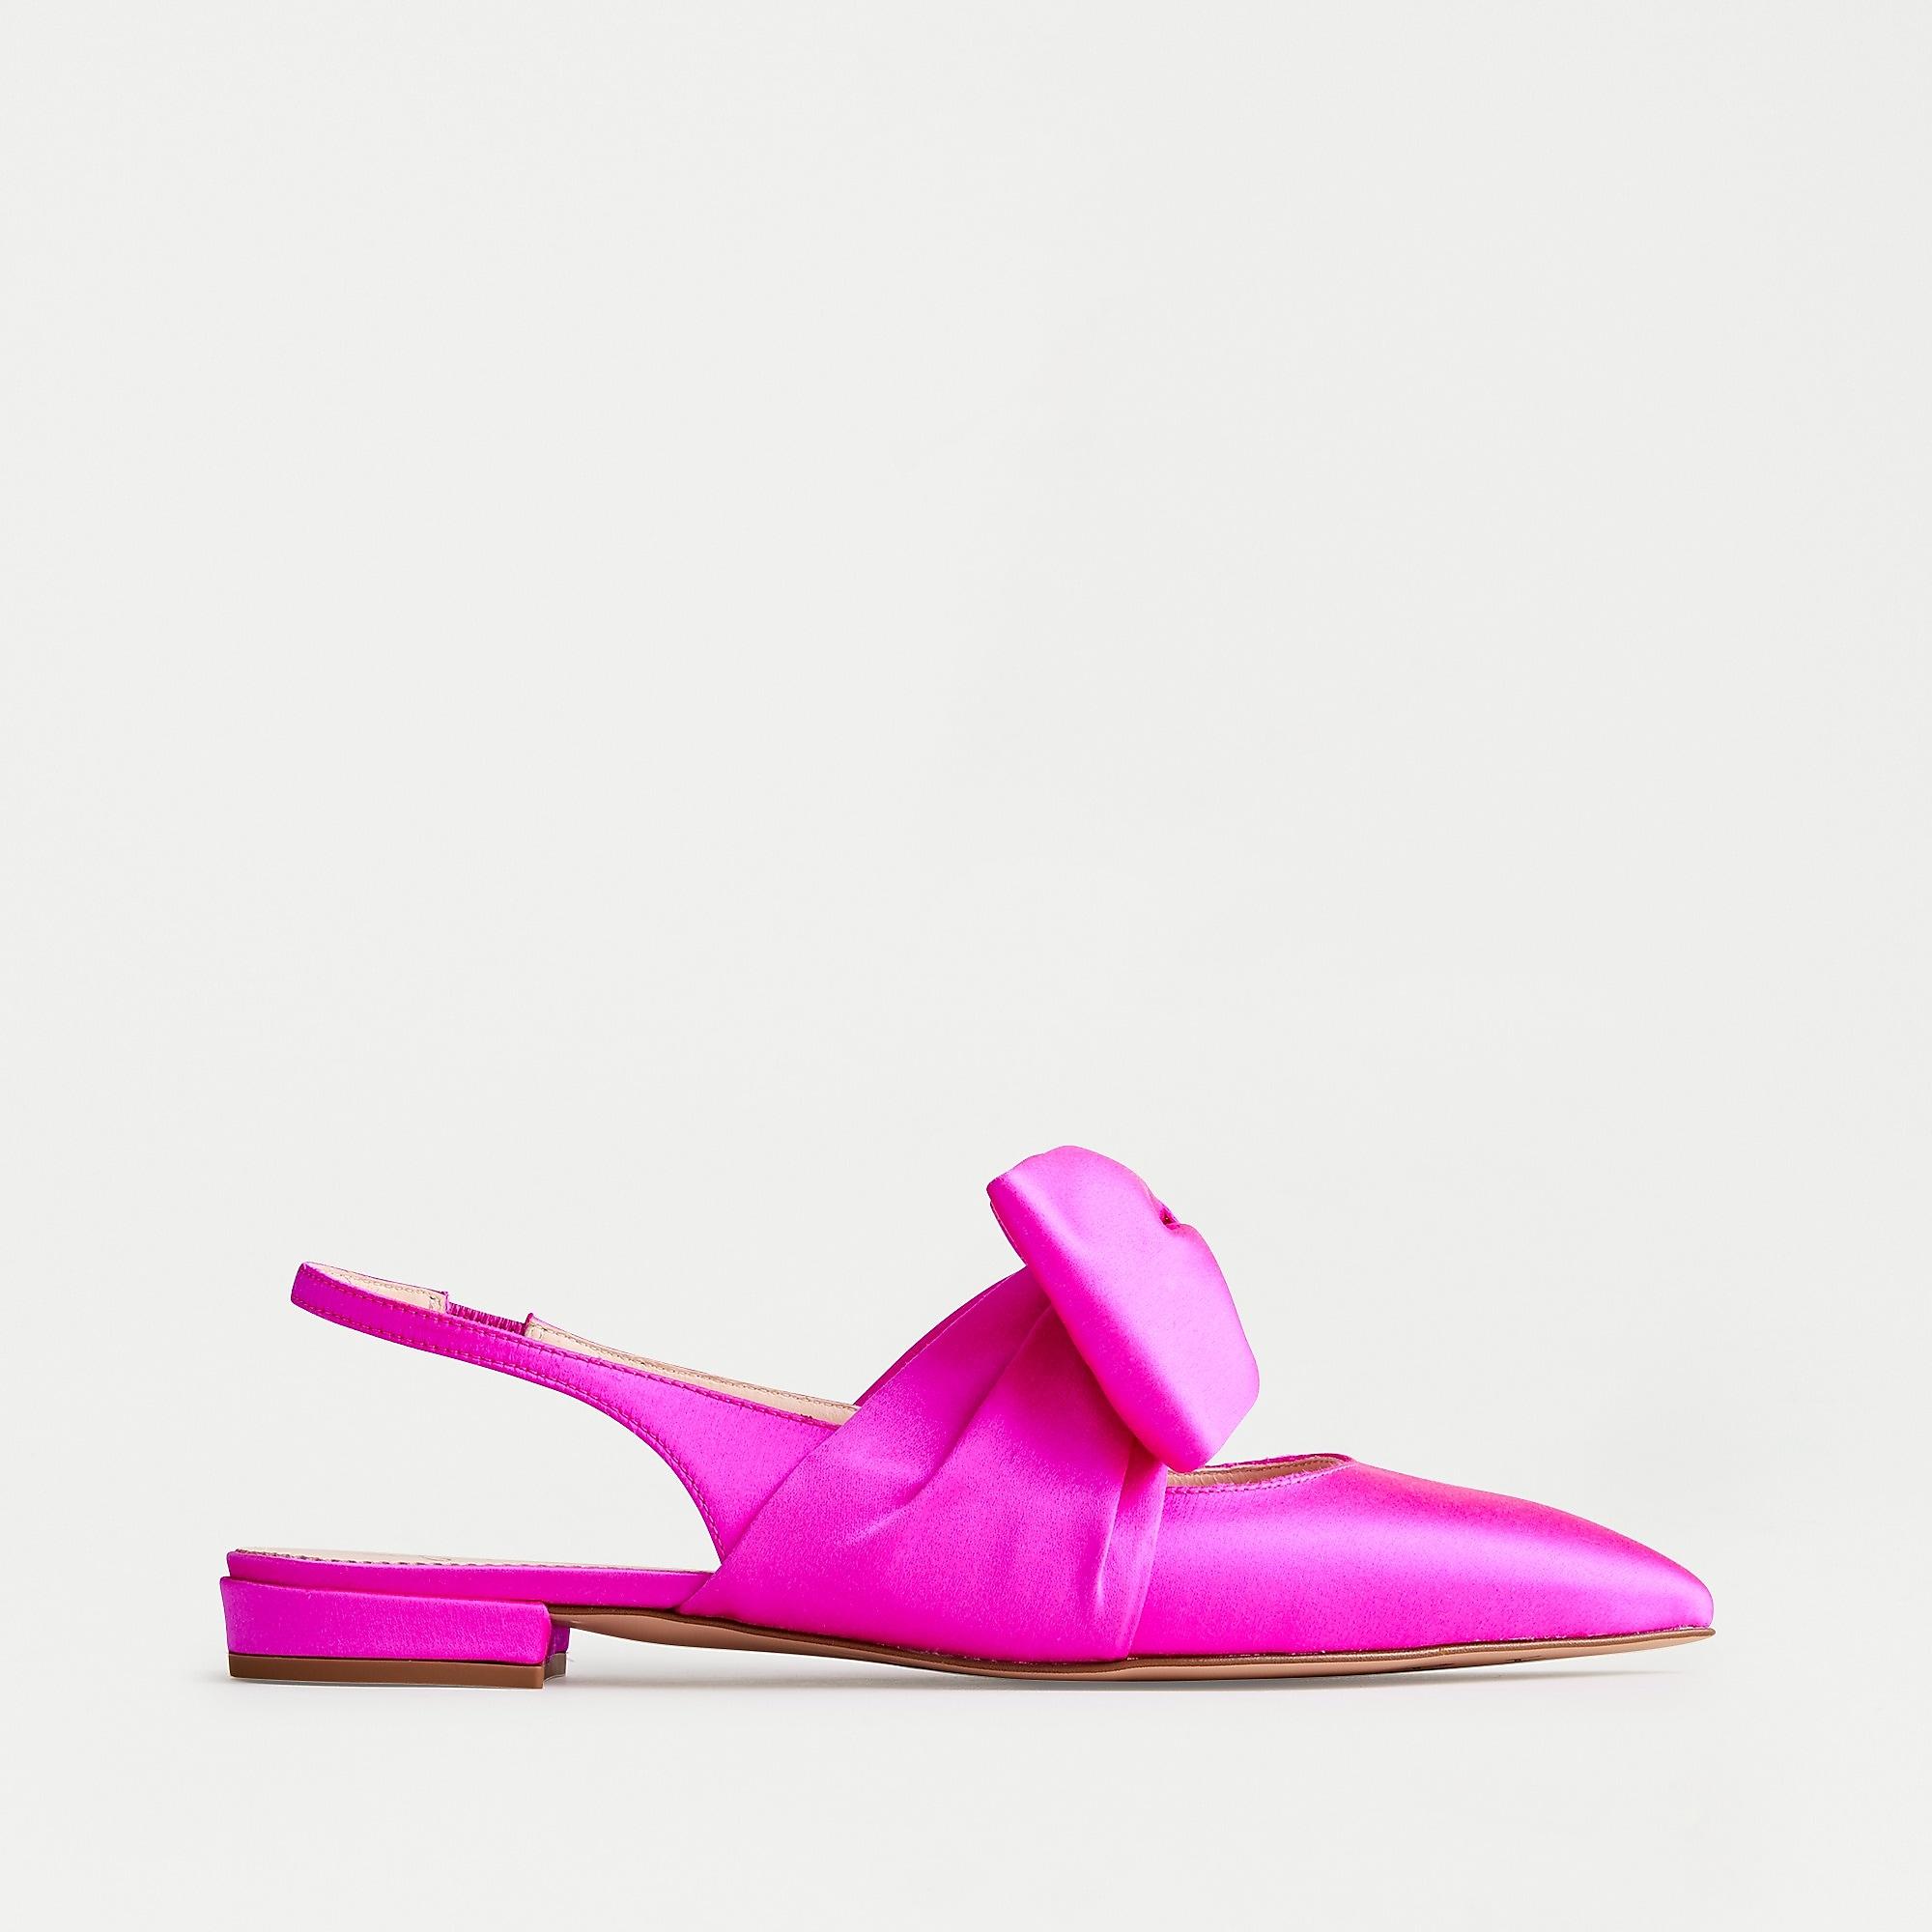 J.Crew Gwen Slingback Flats With Bow In Satin in Pink | Lyst